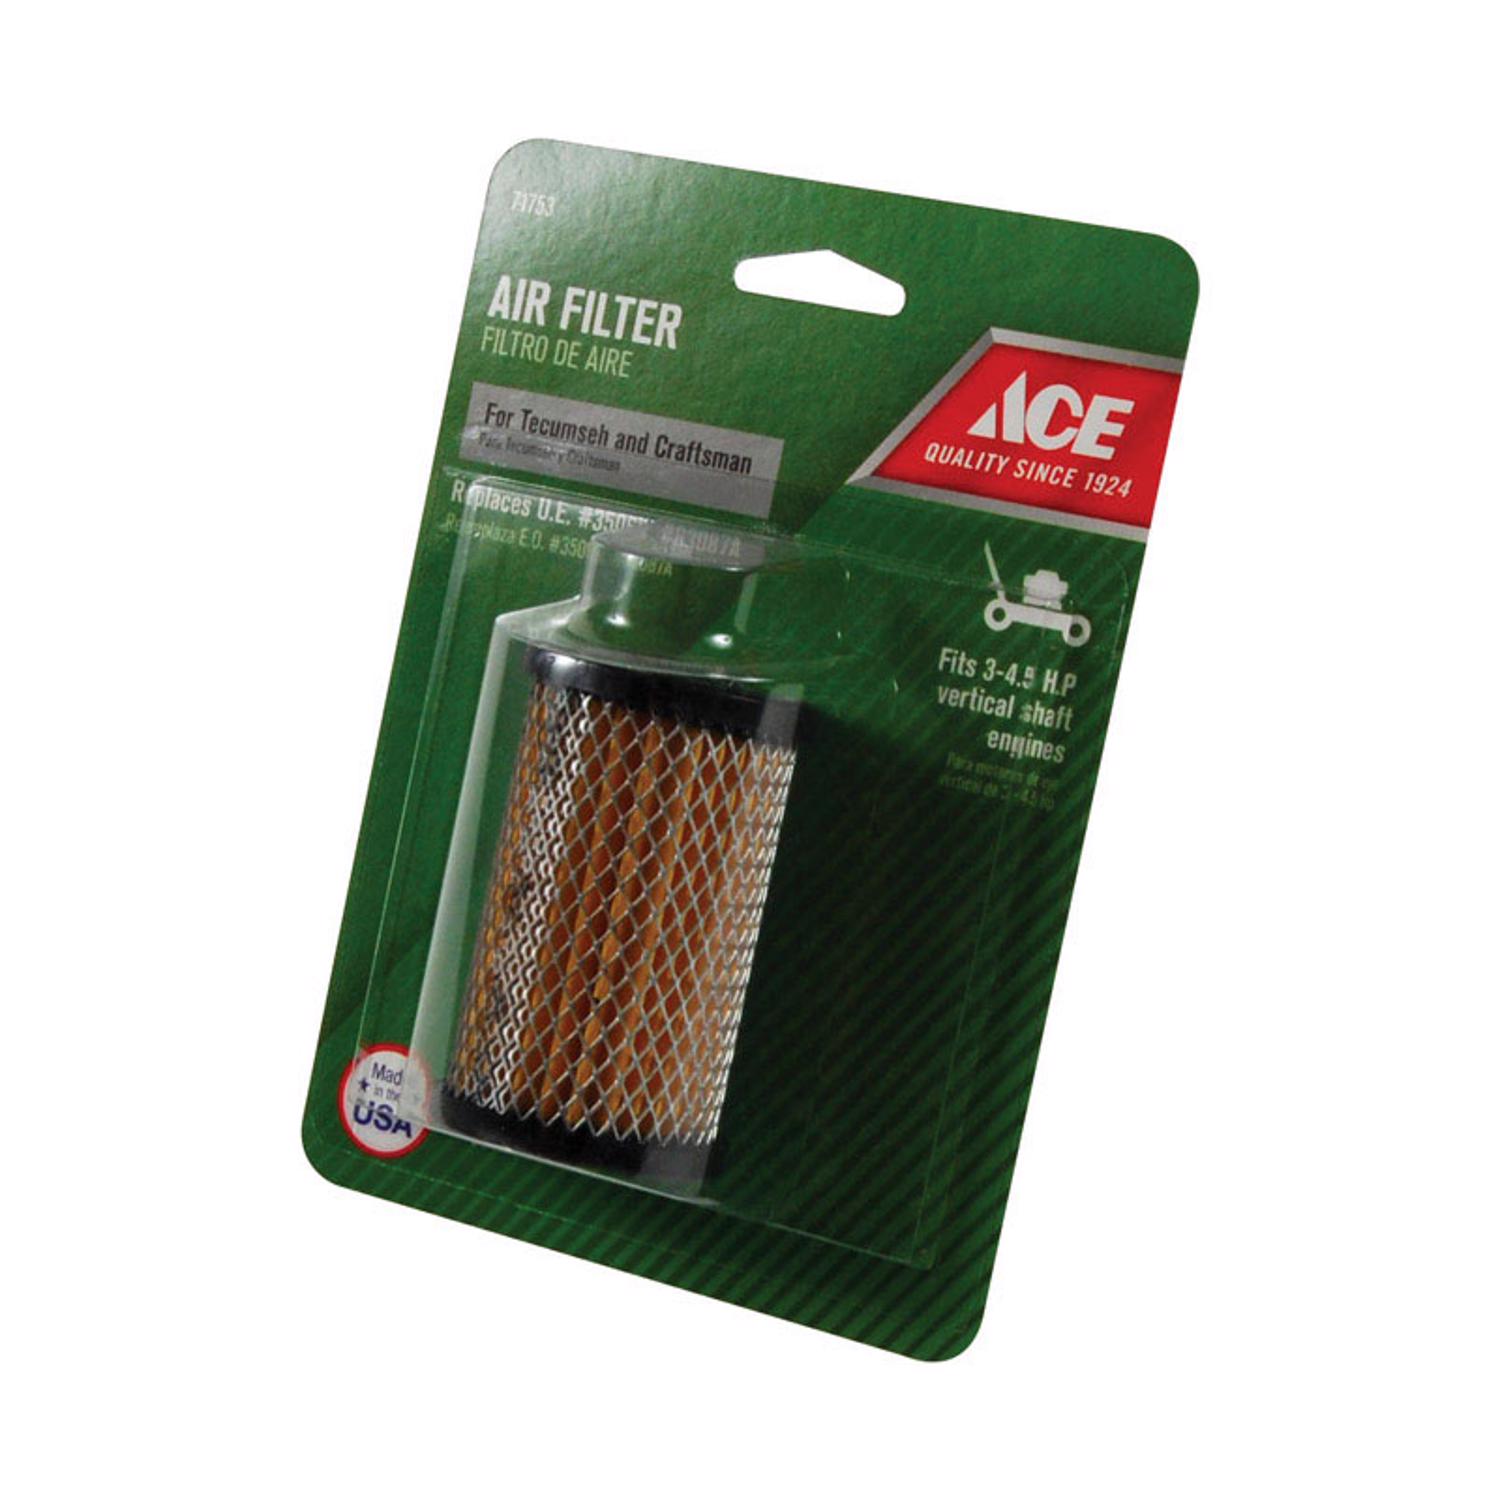 Ace Small Engine Air Filter For 3-4.5 HP Vertical shaft engines